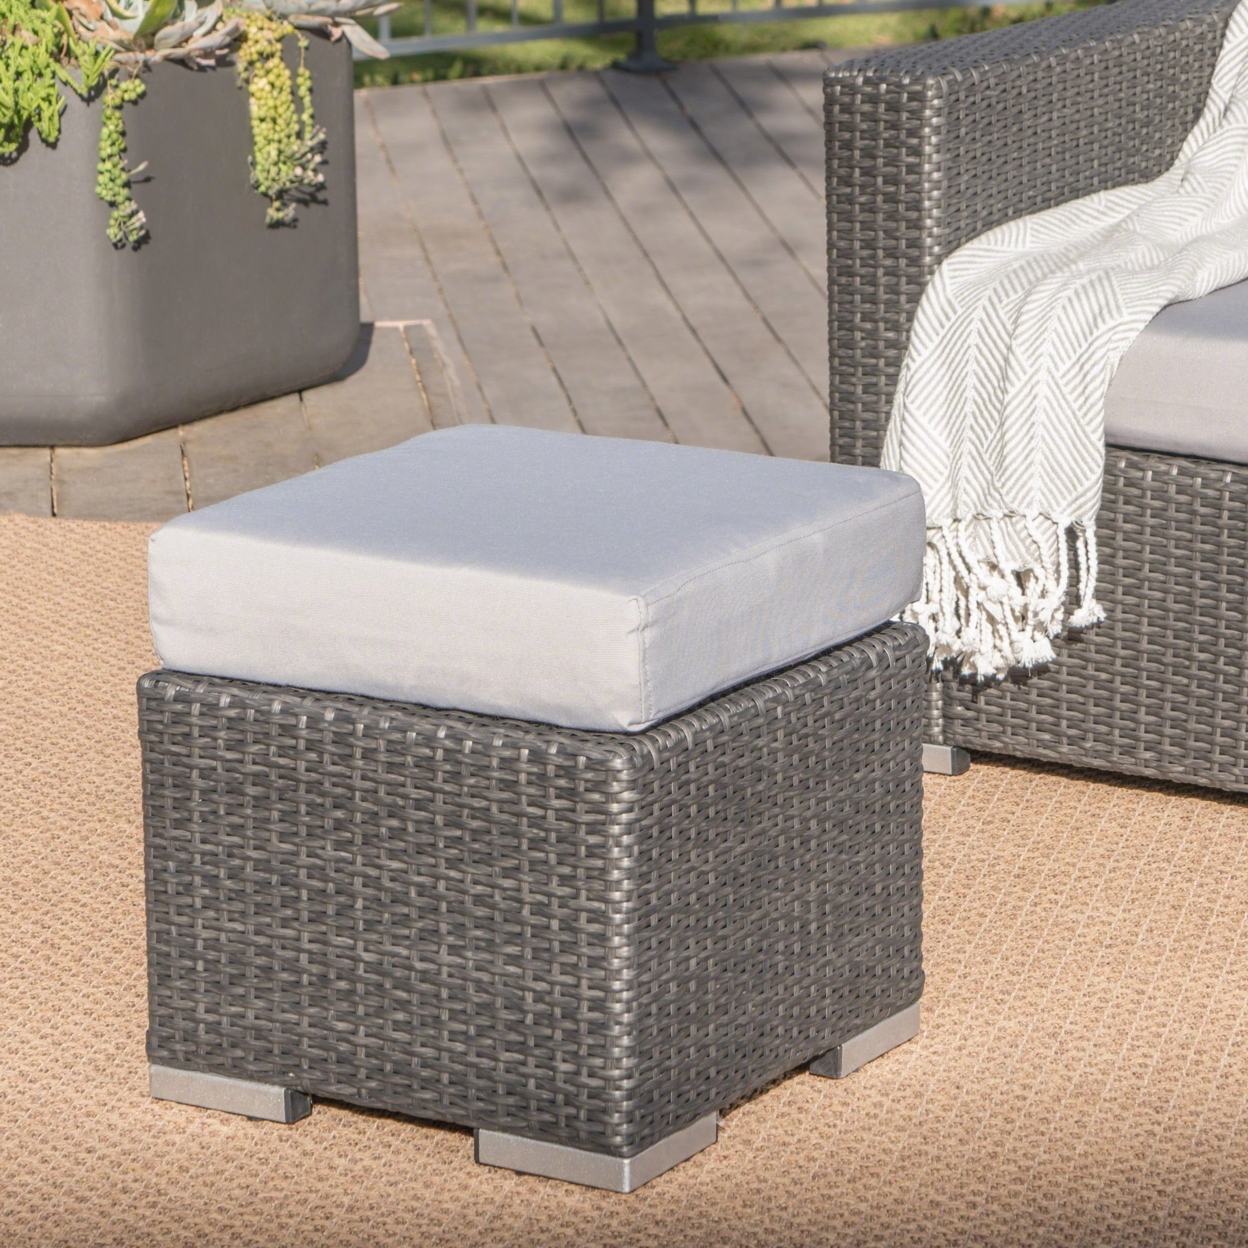 Santa Rosa Outdoor 16 Inch Wicker Ottoman Seat With Water Resistant Cushion - Gray/silver, Single